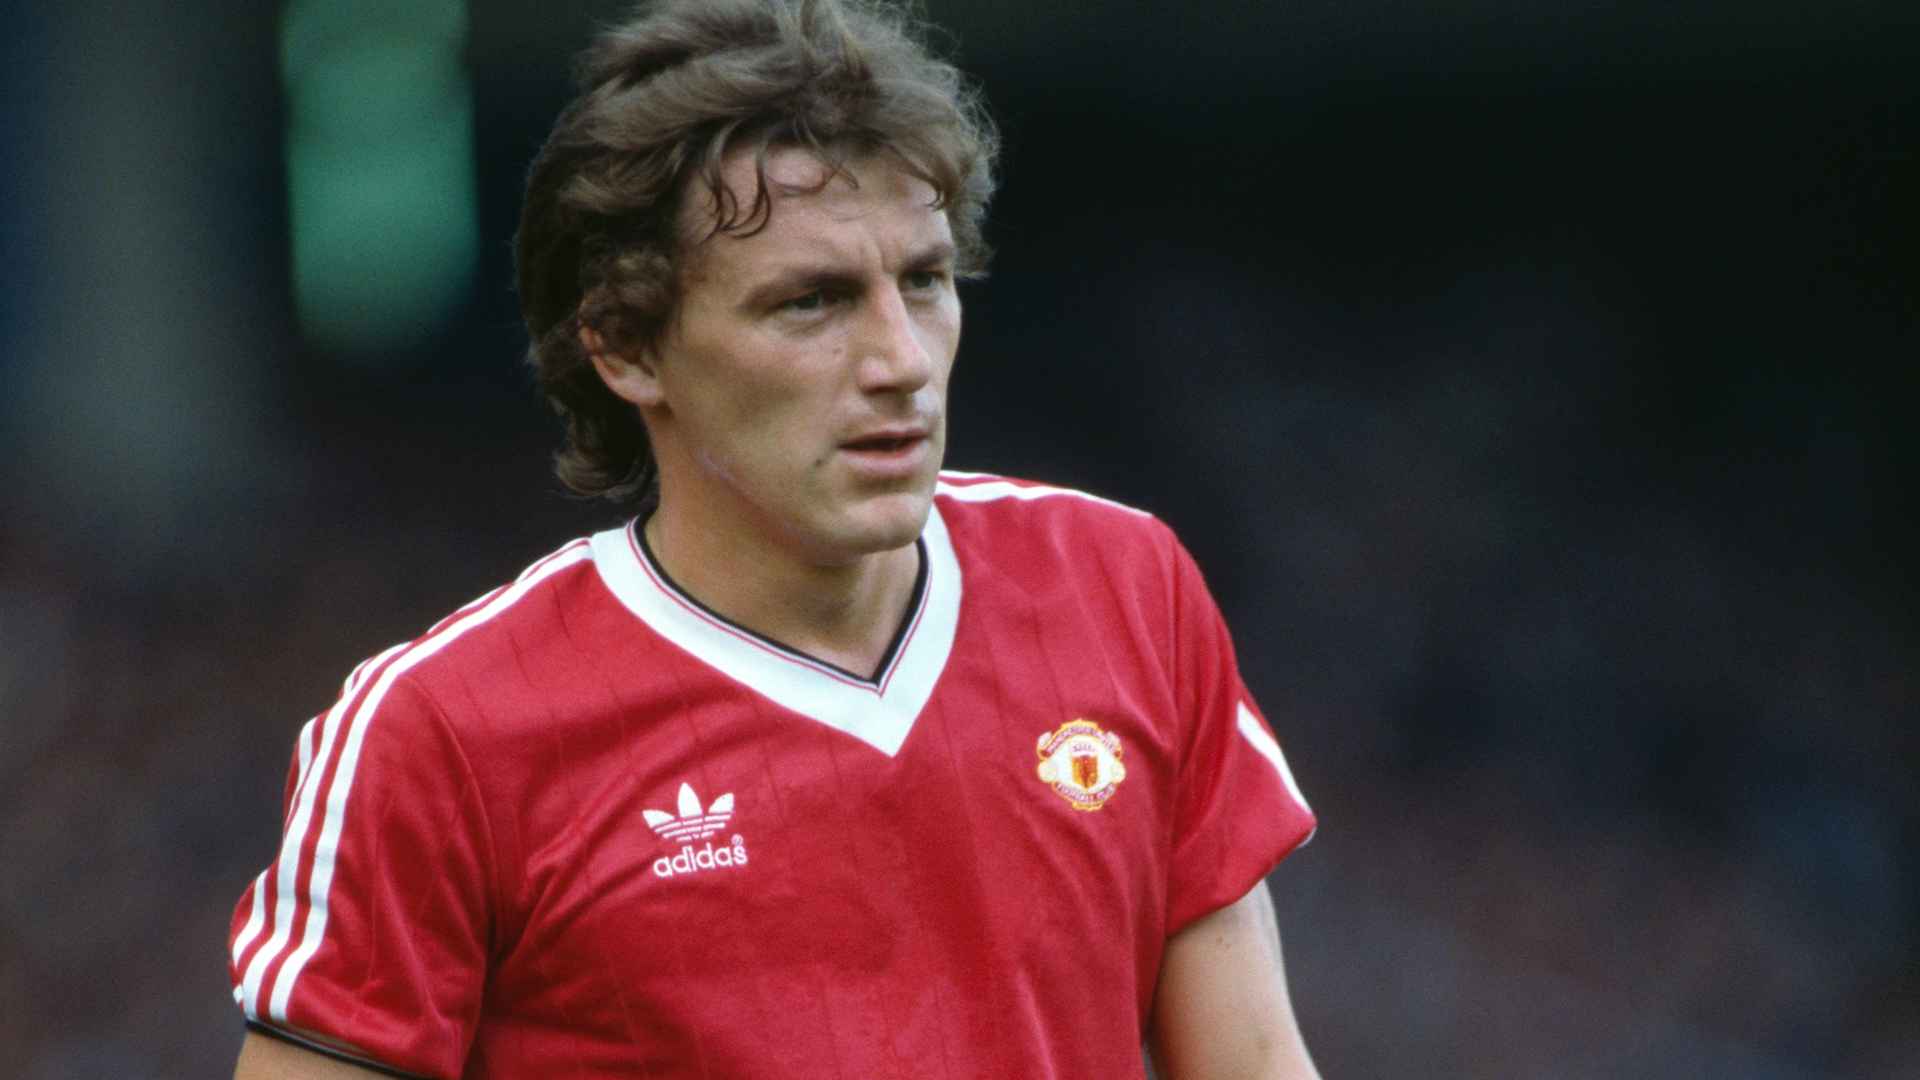 Steve Coppell holds Man Utd record for consecutive league appearances | Manchester United